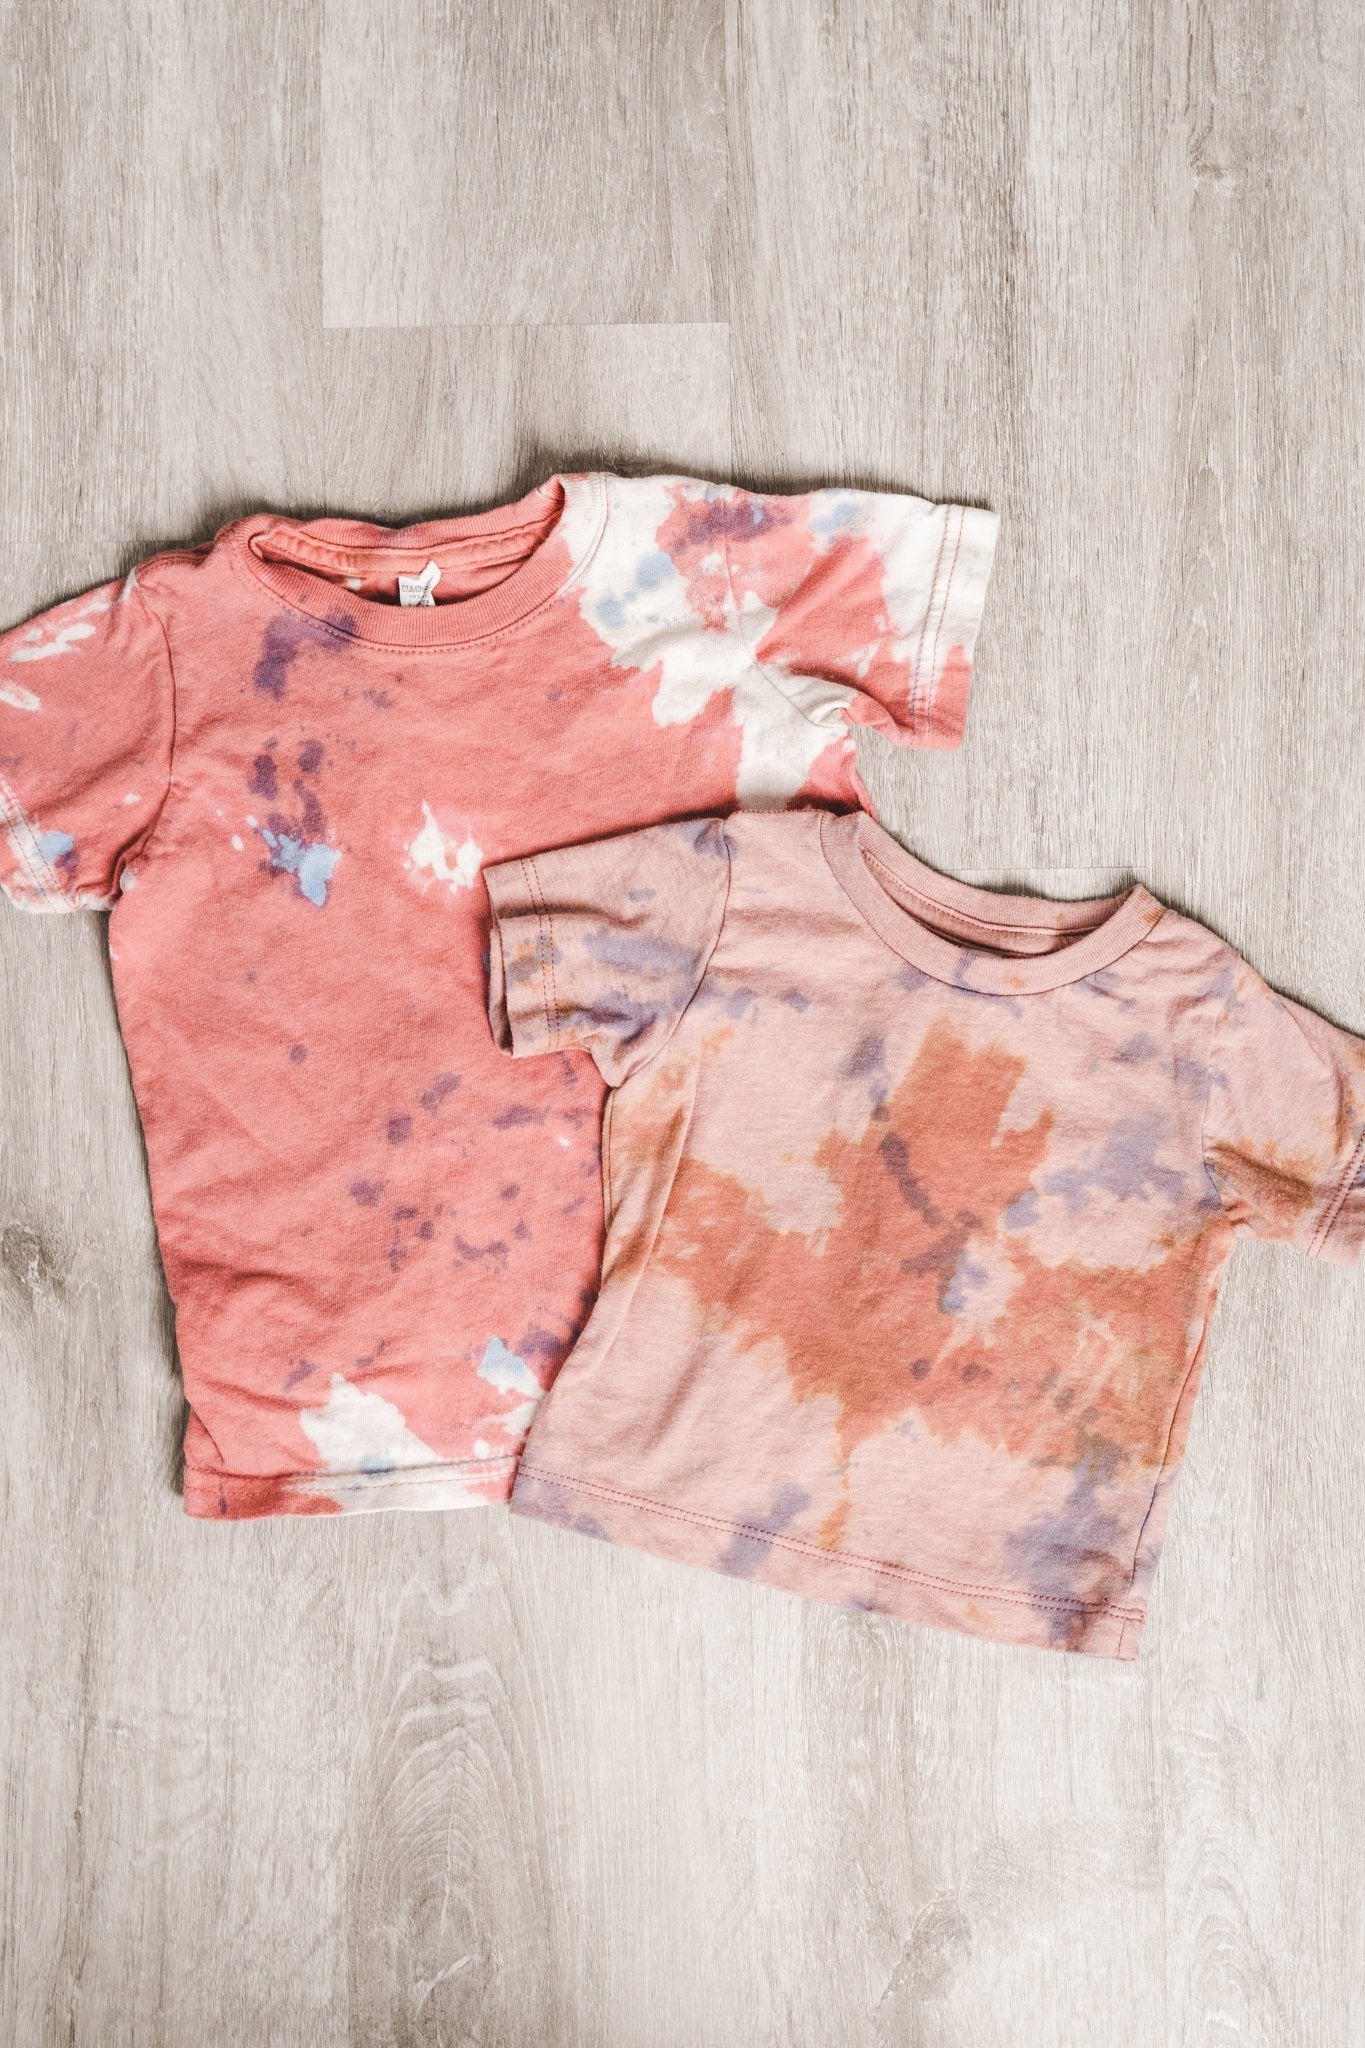 KIDS reverse and blue tie dye tee mauve - Tie Dye T-shirts - Tie Dye Clothing at Lush Fashion Lounge Trendy Boutique in Oklahoma City